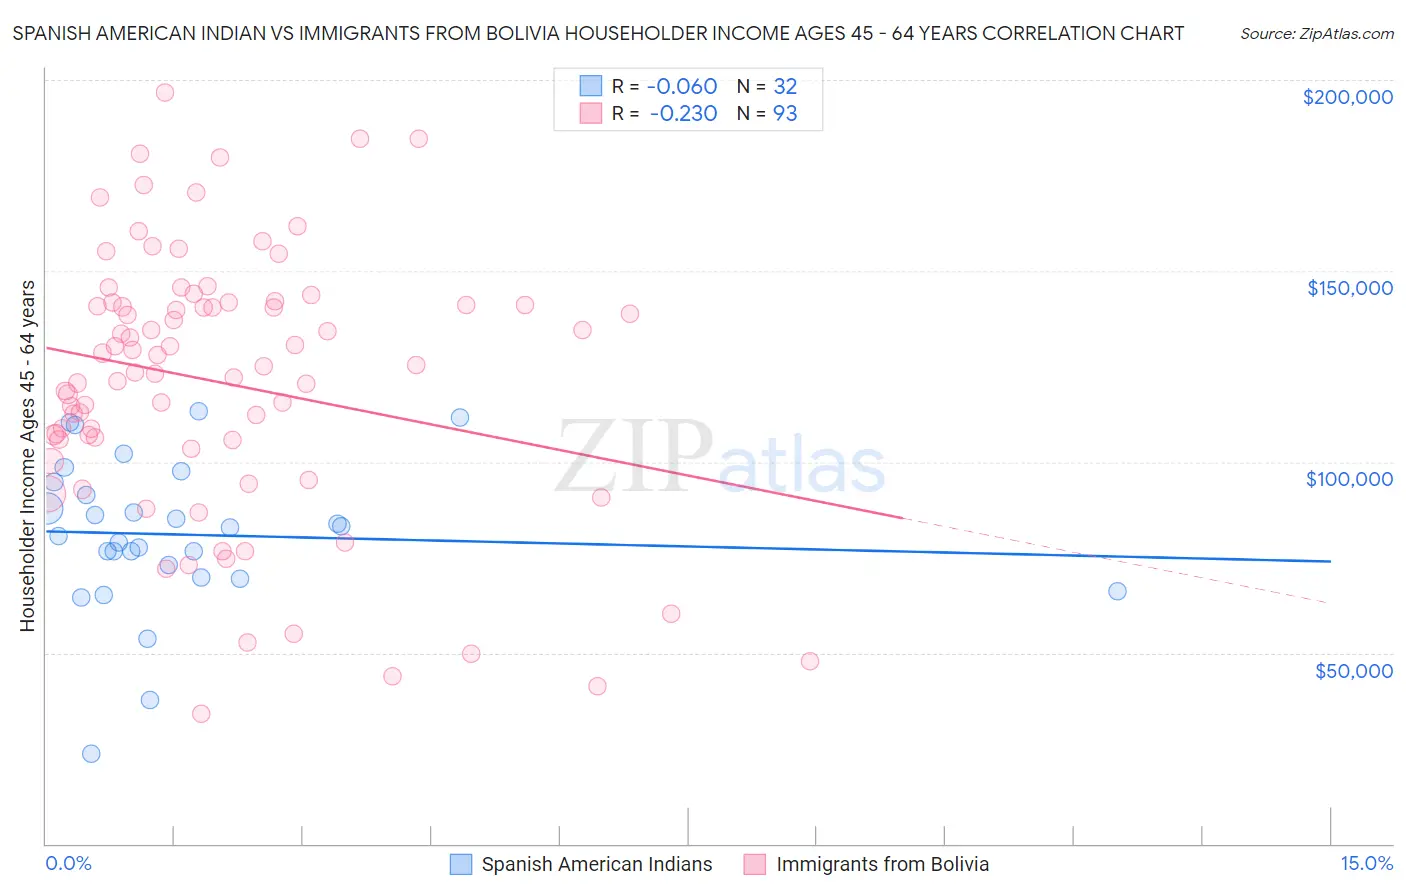 Spanish American Indian vs Immigrants from Bolivia Householder Income Ages 45 - 64 years